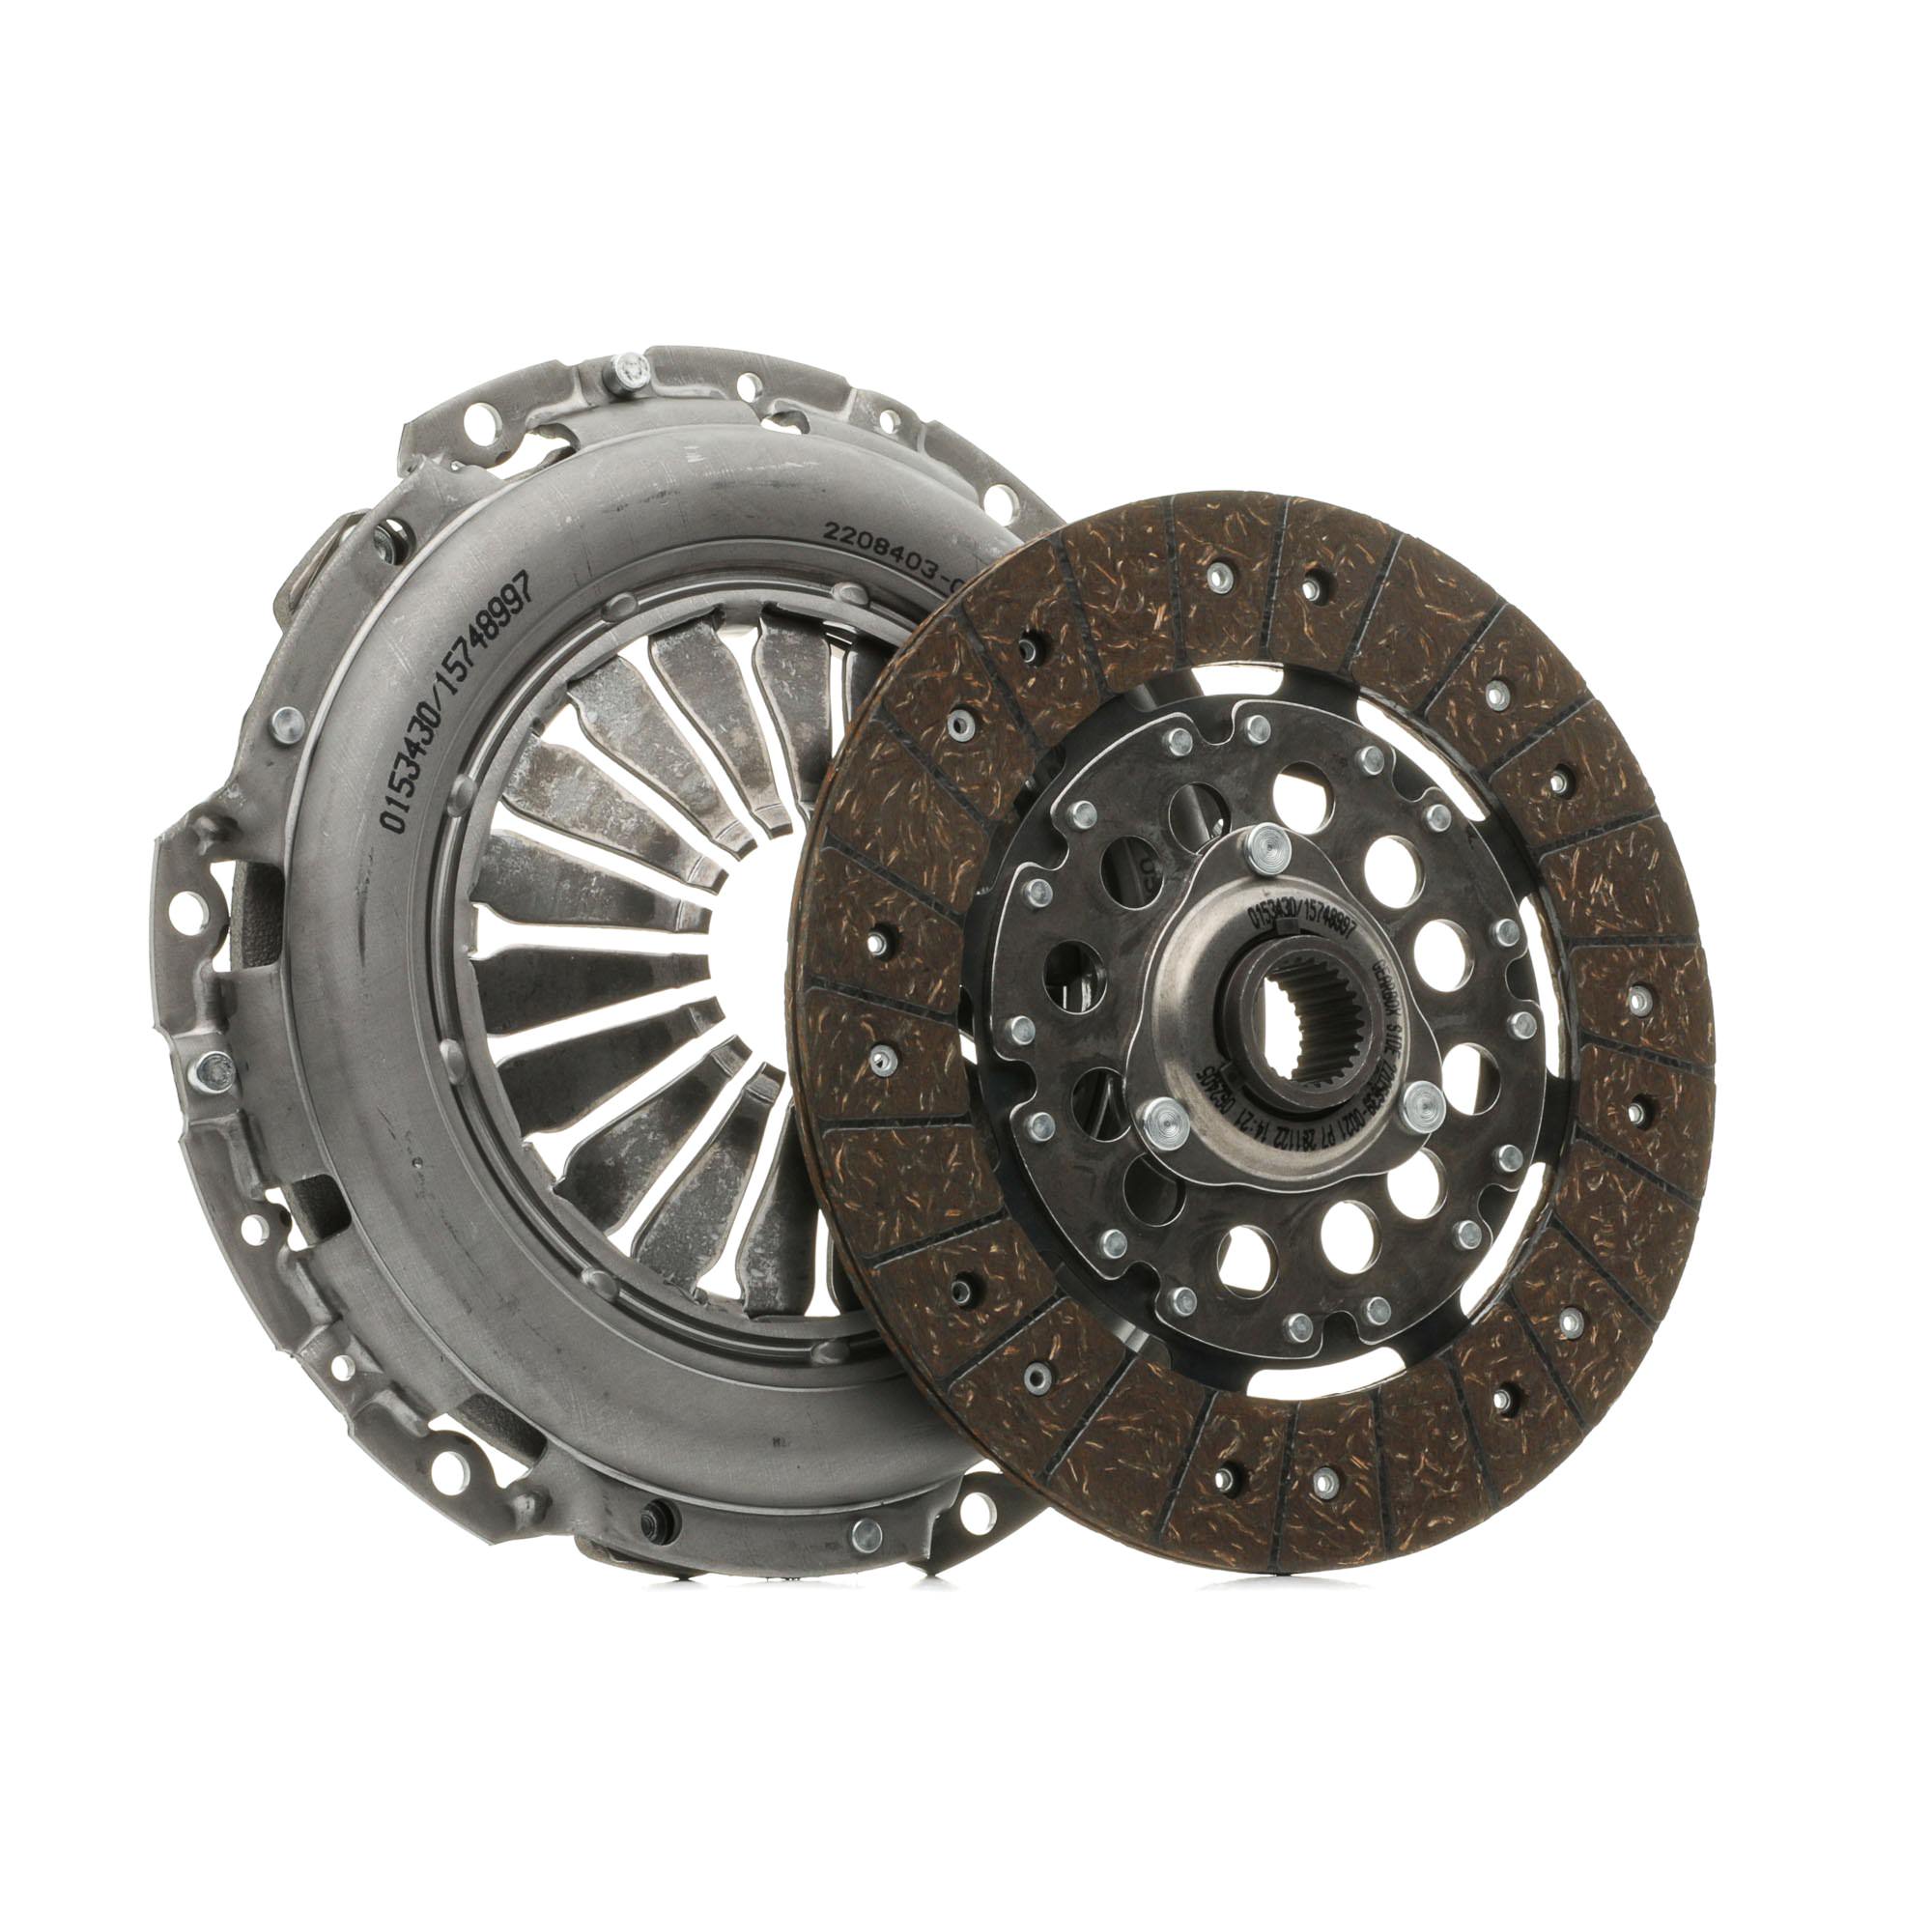 STARK SKCK-0100881 Clutch kit for engines with dual-mass flywheel, with clutch disc, without clutch release bearing, Requires special tools for mounting, Check and replace dual-mass flywheel if necessary., with automatic adjustment, 240mm